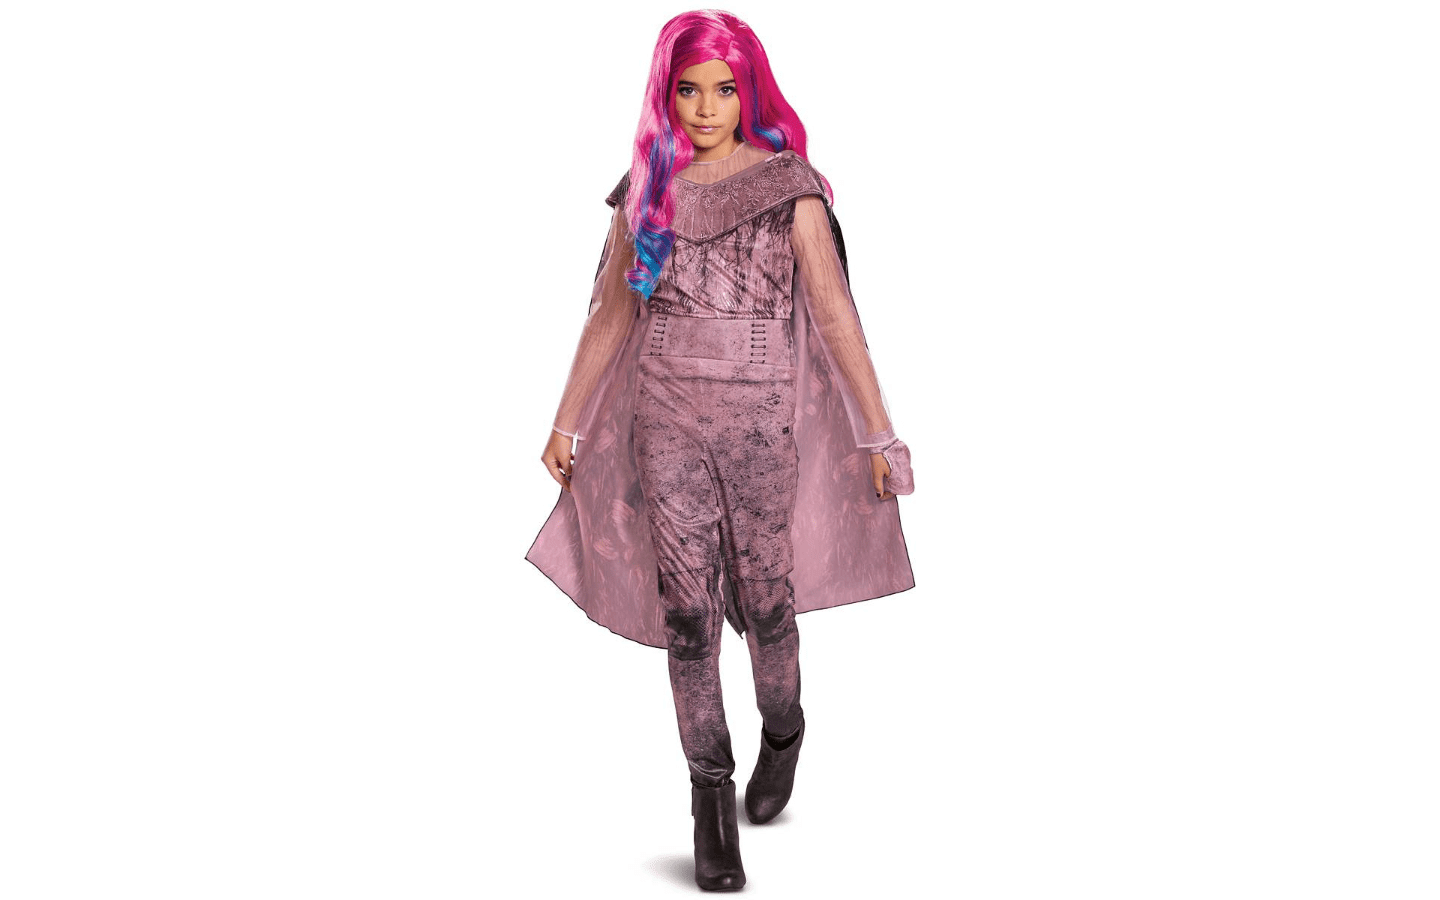 Descendants 3 Audrey Costume. Even Kids Who Think They're Too